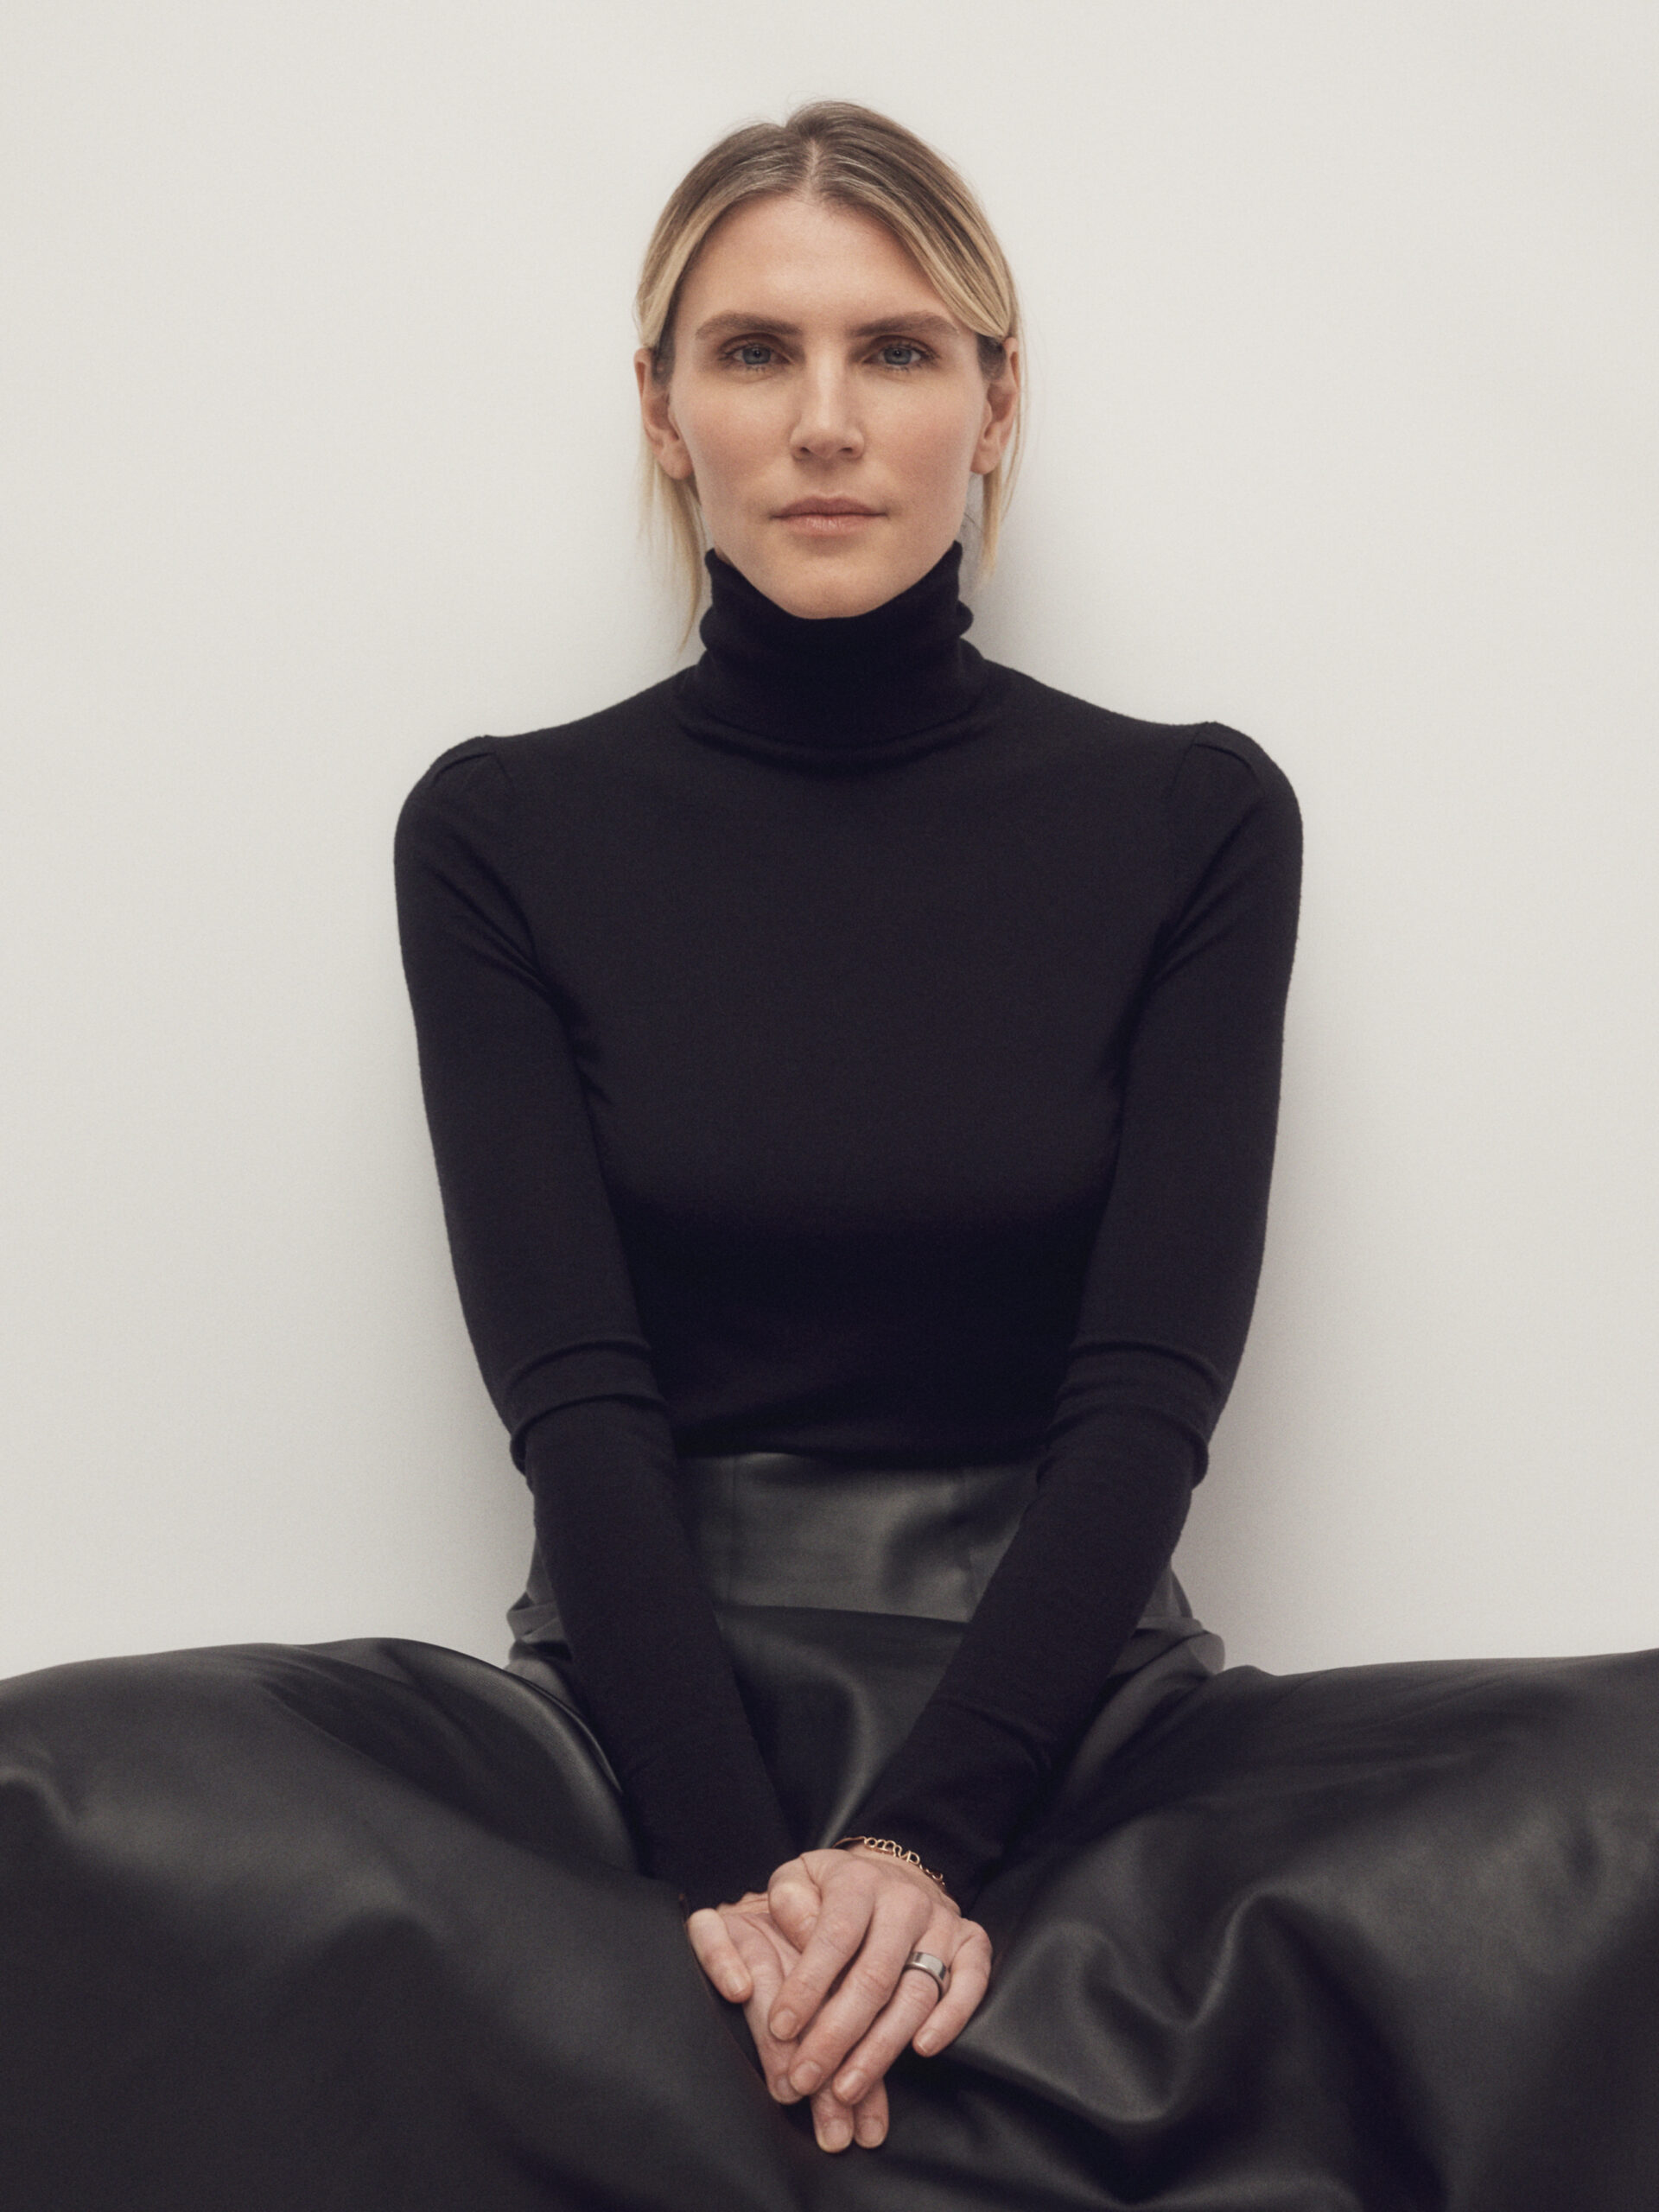 Gabriela Hearst is creating luxury fashion you can feel good about